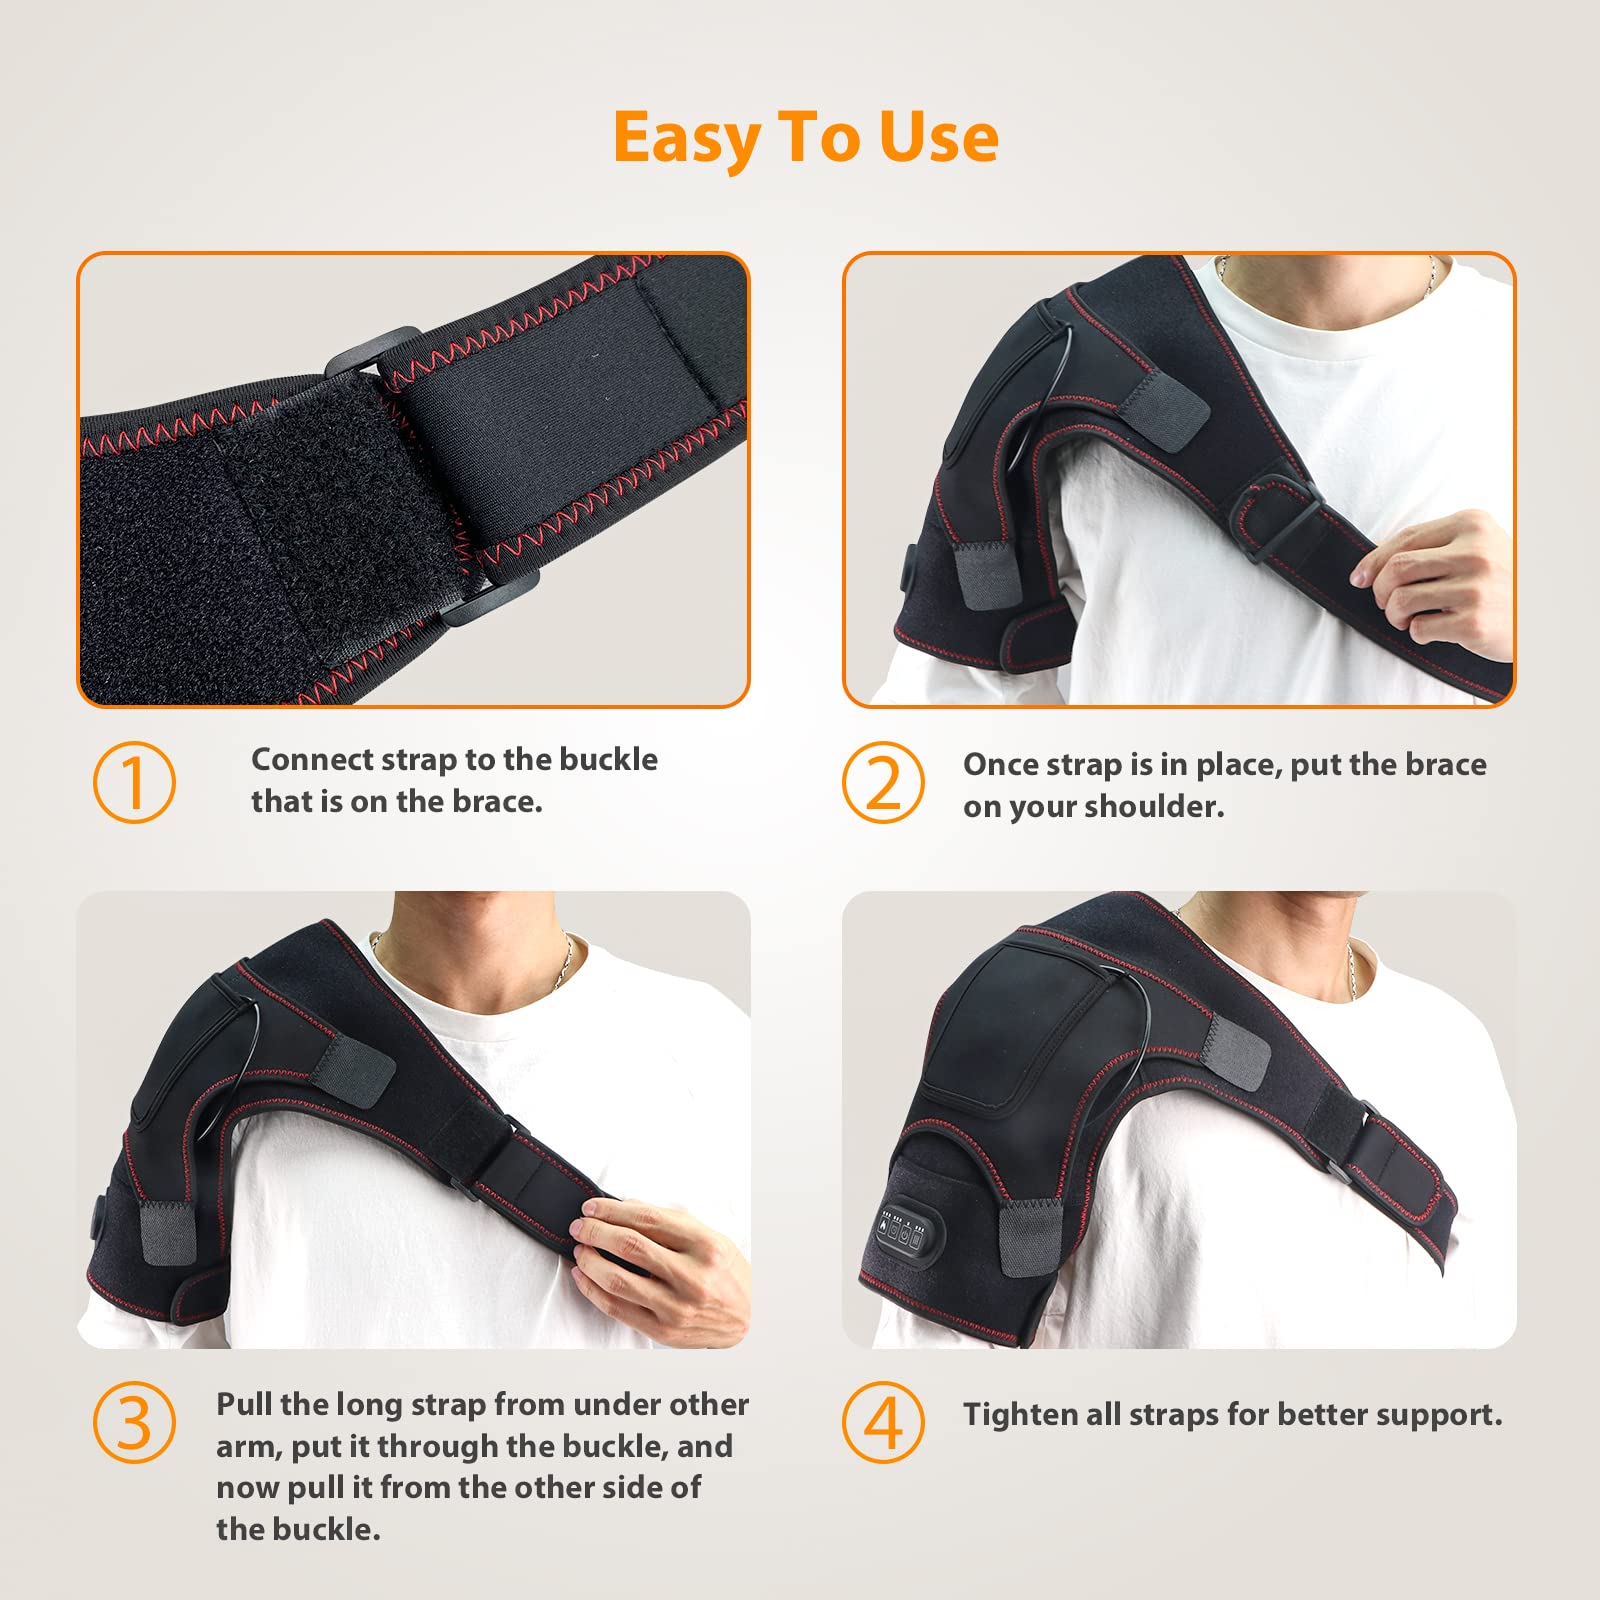 Heated Shoulder Wrap for Men Women, Upgrade Electric Heating Pad Massager with 3 Vibration and Heat Settings and Timer, Shoulder Braces for Rotator Cuff, Joint Capsule, Muscles Pain Relief